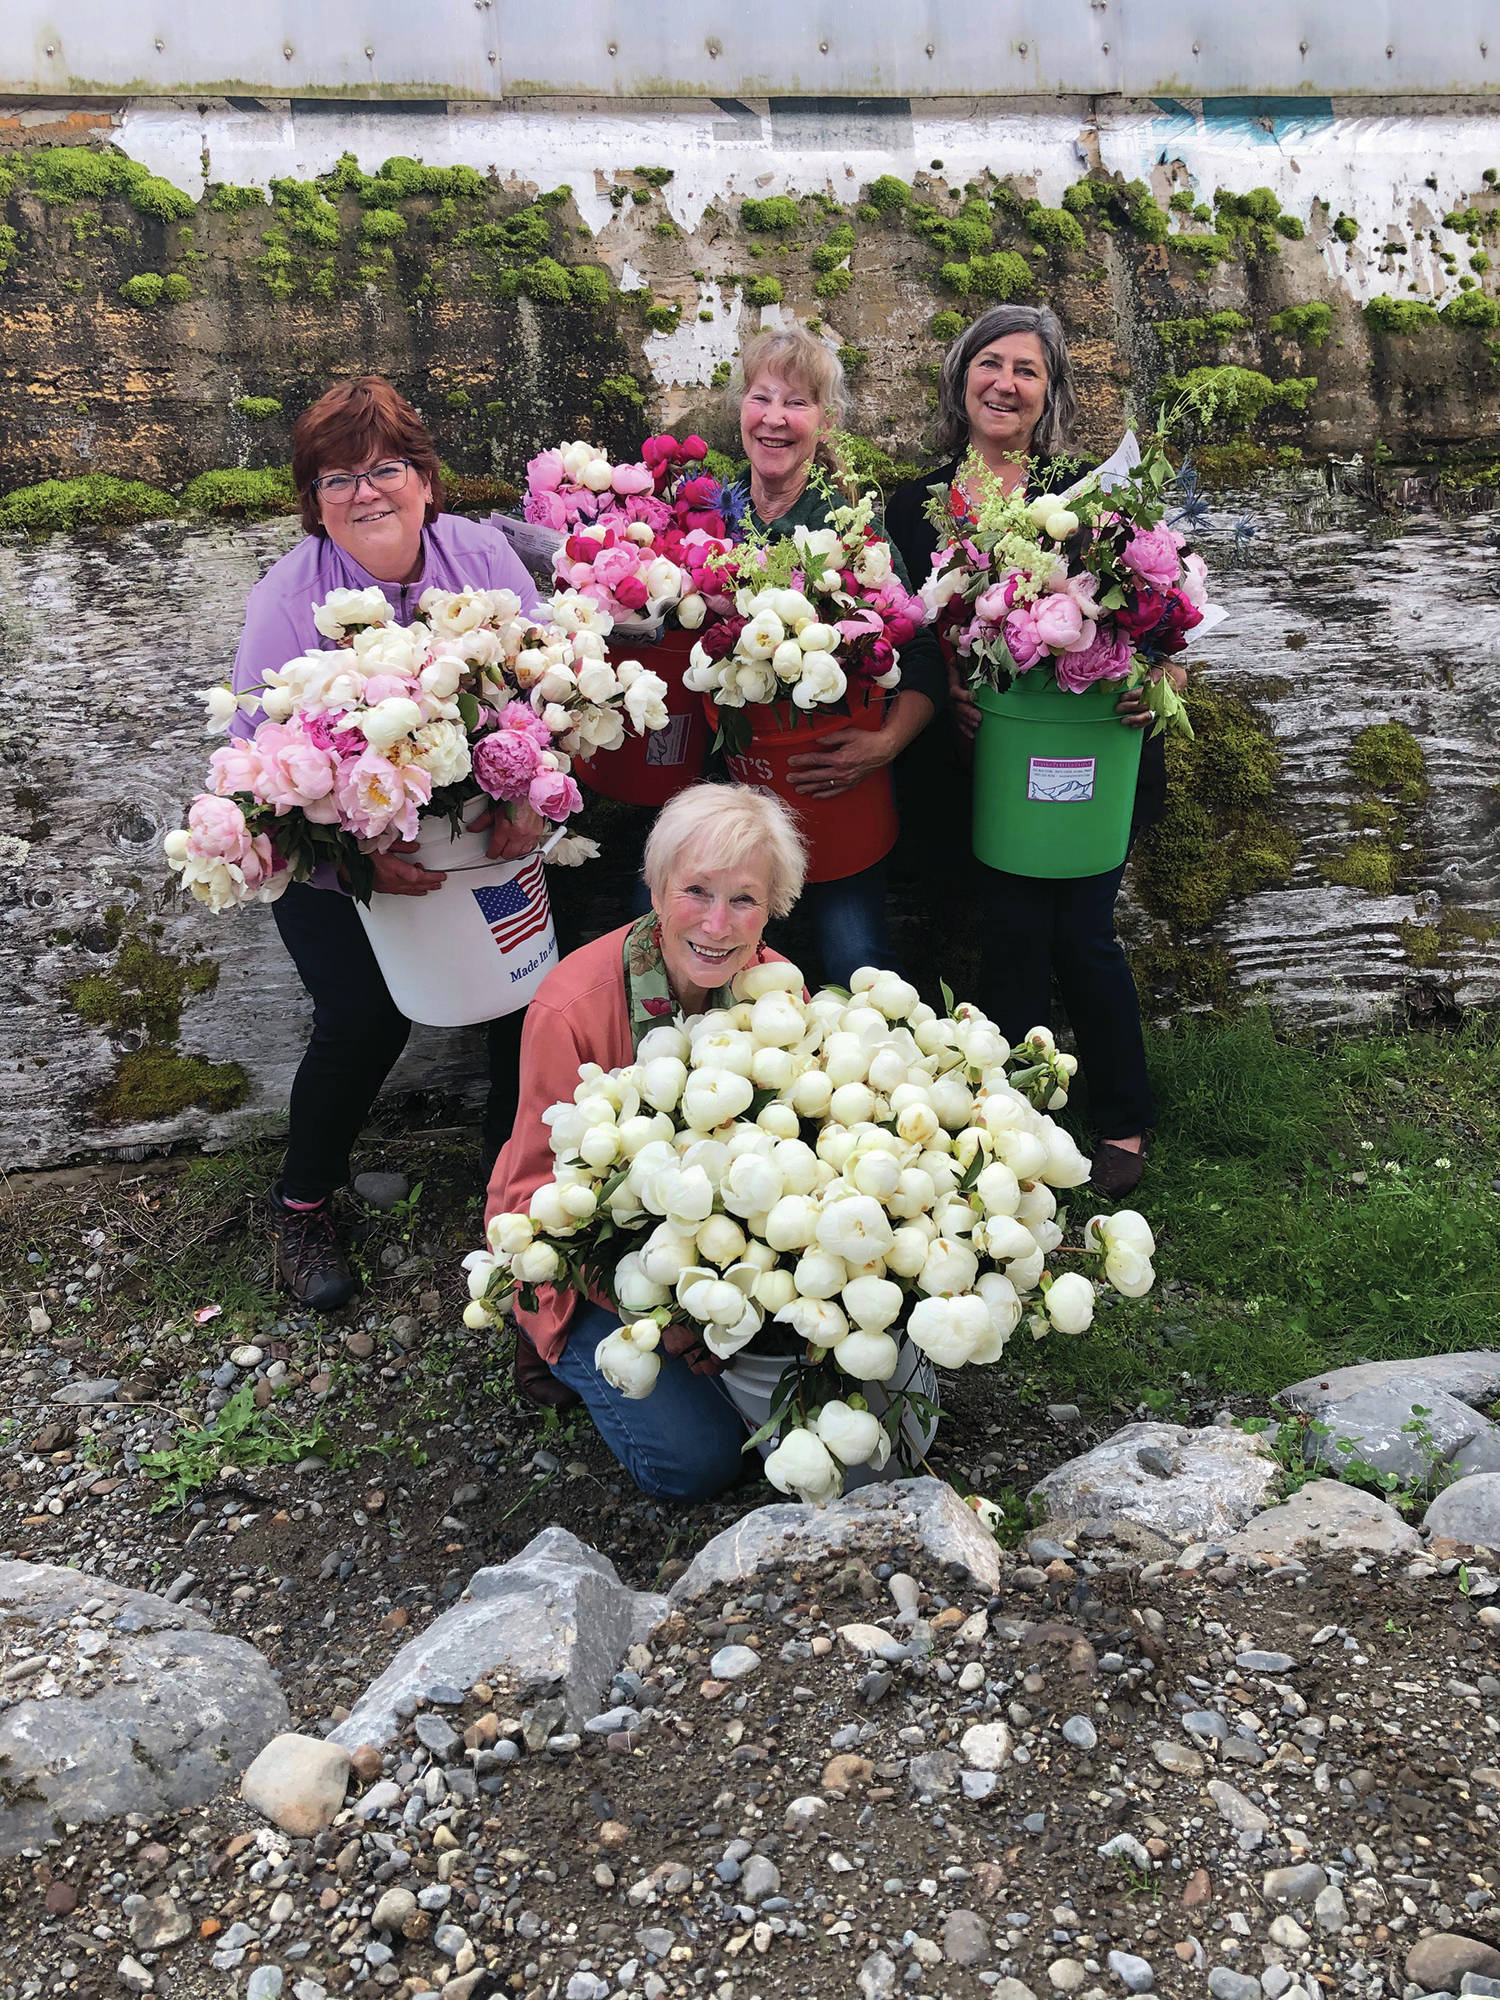 Teri Robl, at left, top, poses with friends on Aug. 7, 2020, at Alaska Perfect Peony in Fritz Creek, Alaska. From left to right, top, are Robl, Suzanne Singer-Alvarez and Sarah Jackinsky. At front is Rita Jo Shoultz, owner of Alaska Perfect Peony. (Photo by Julie Shaw)